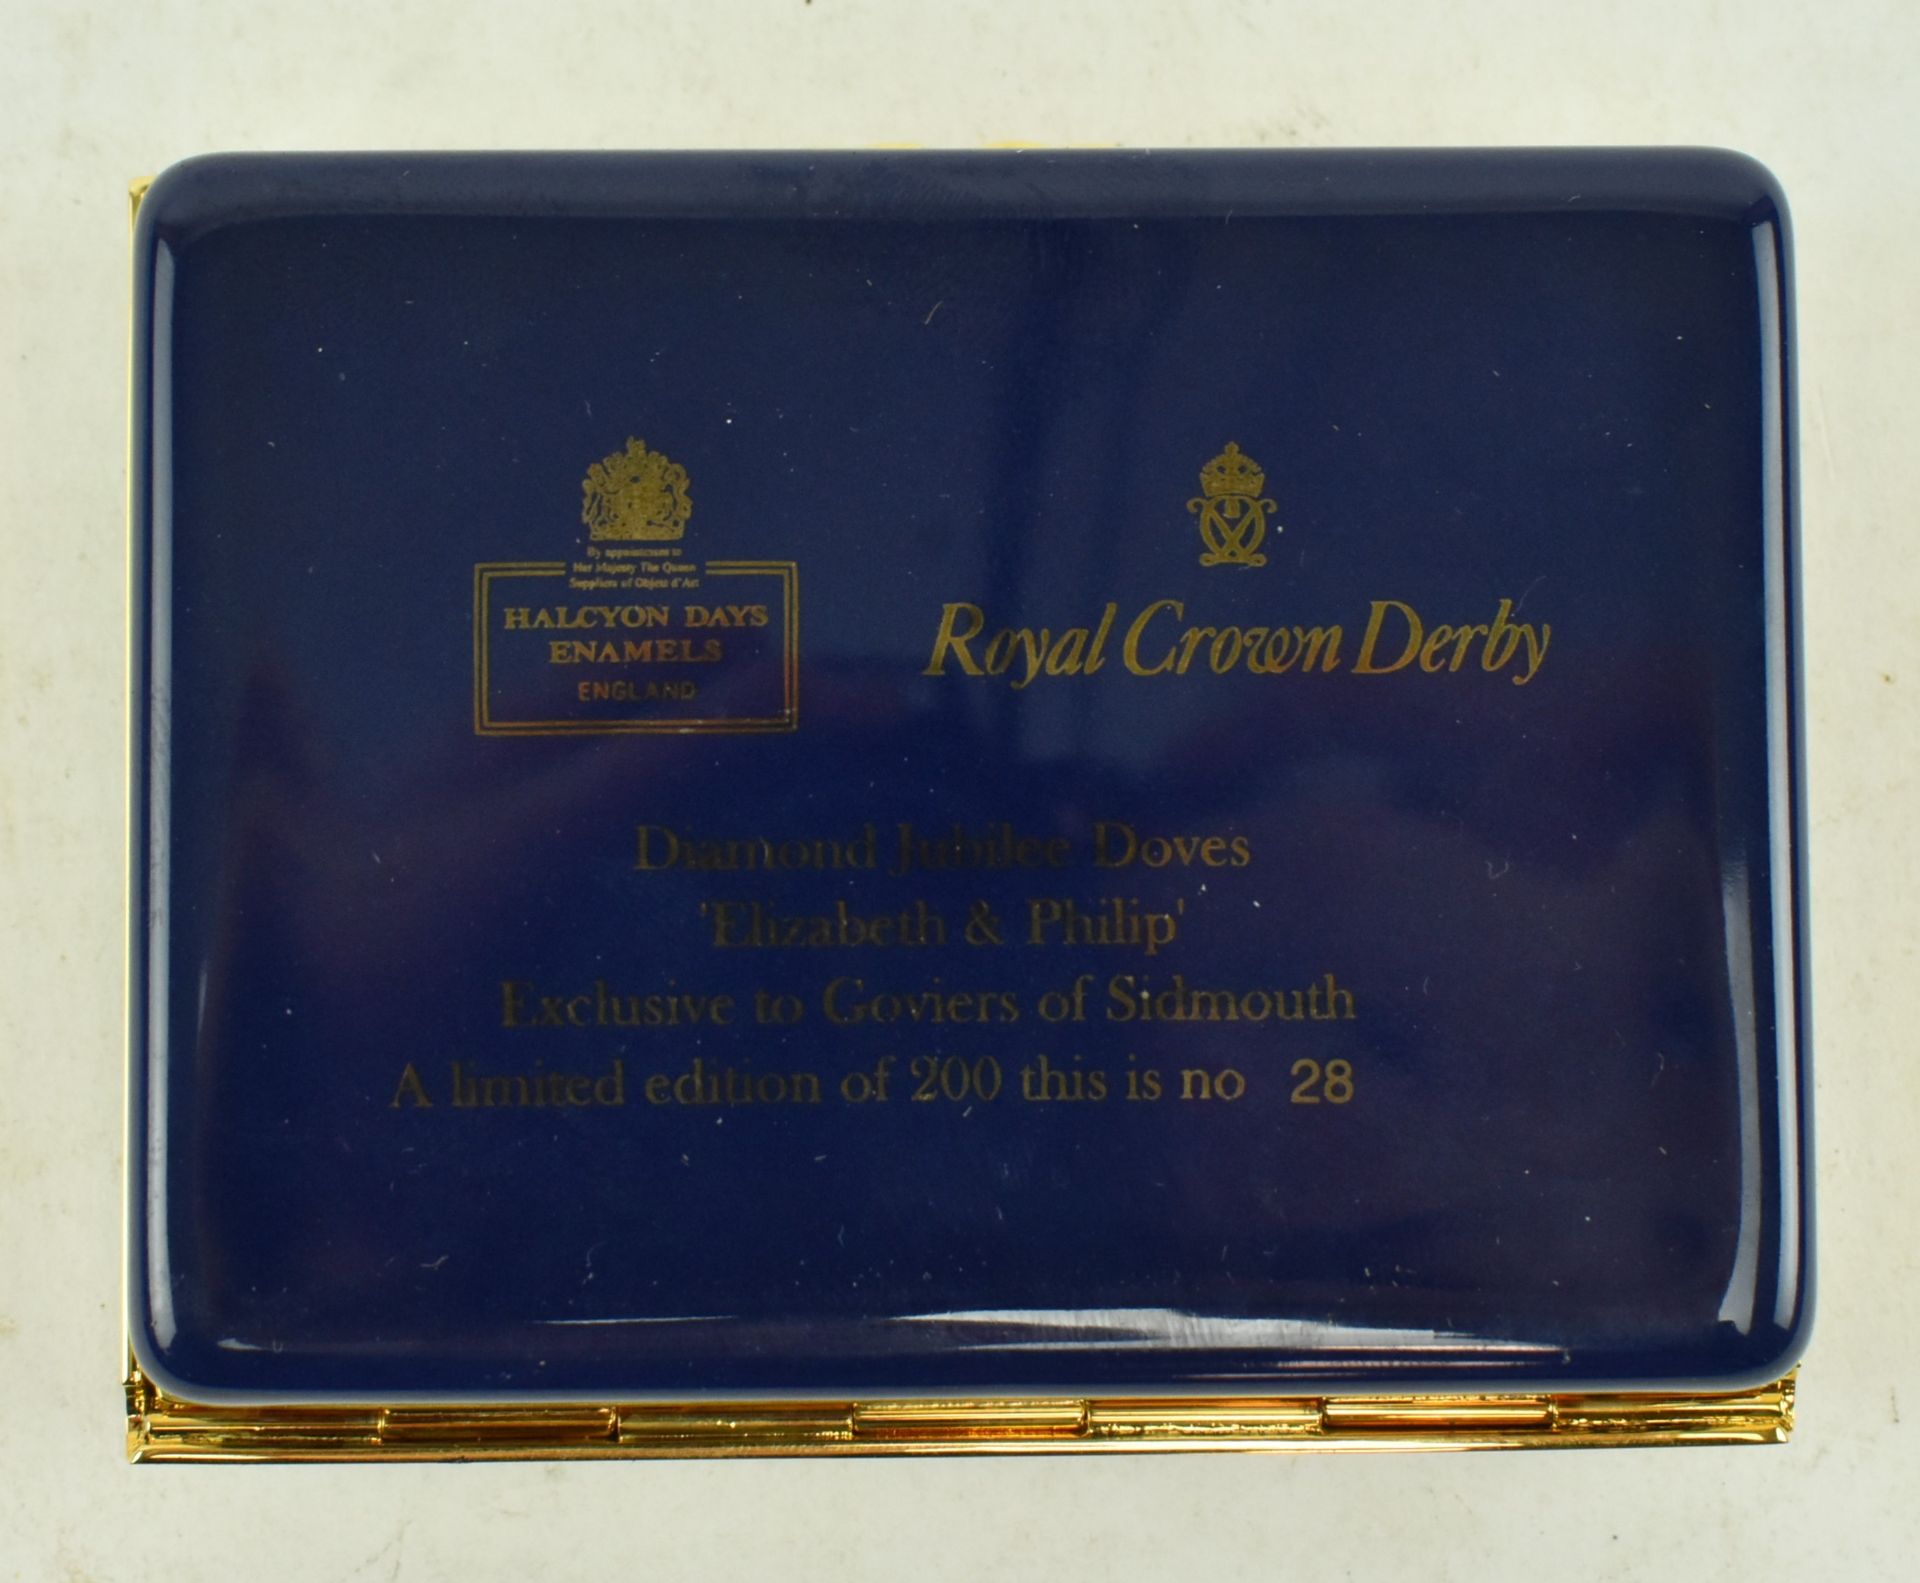 ROYAL CROWN DERBY - LIMITED EDITION HALCYON DAYS ENAMEL BOX - Image 4 of 6